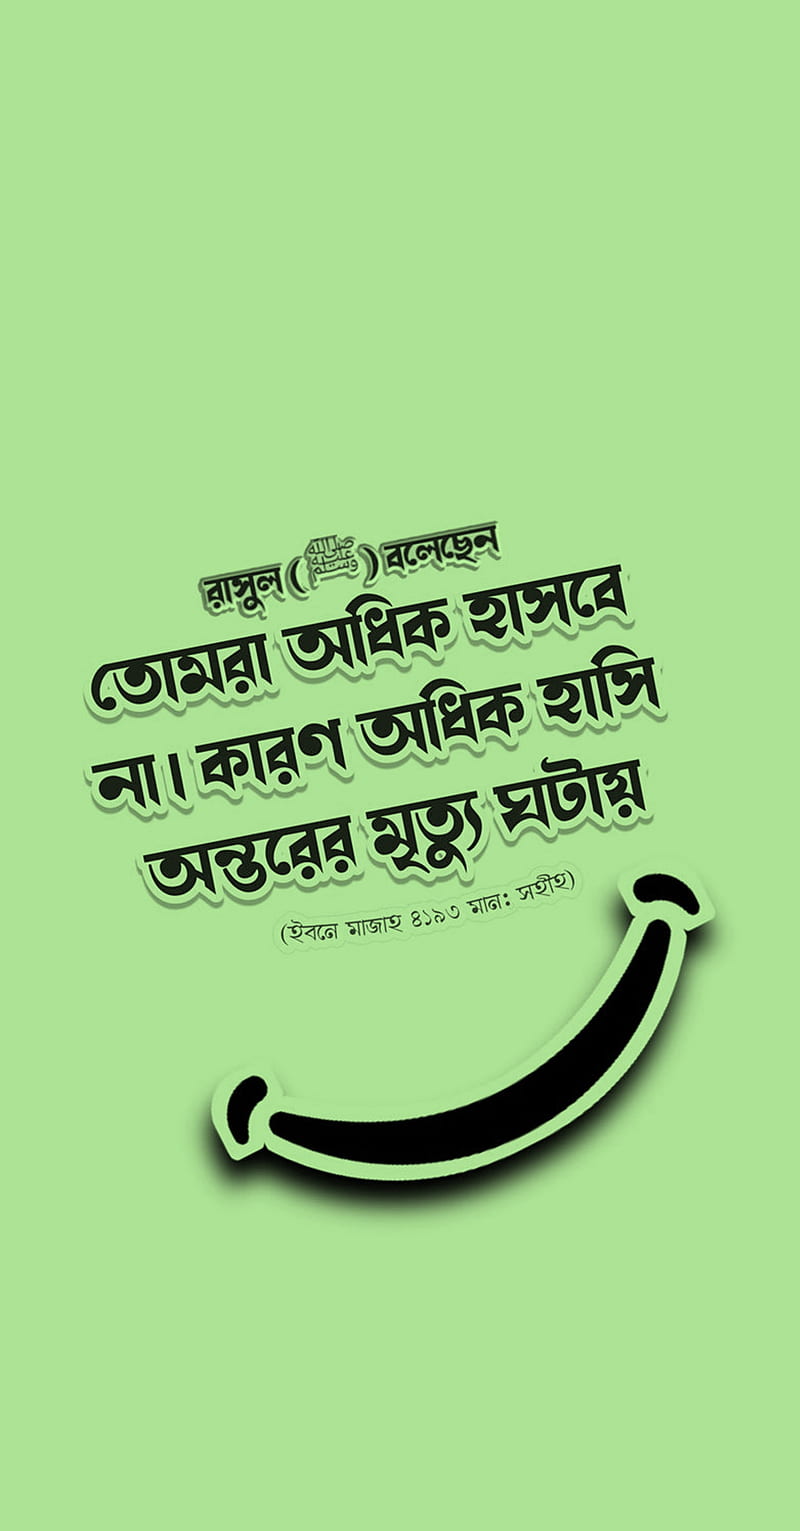 Never Smile Too Much, bangla, face, green, hadith, islamic, never, smile, smiling, HD phone wallpaper